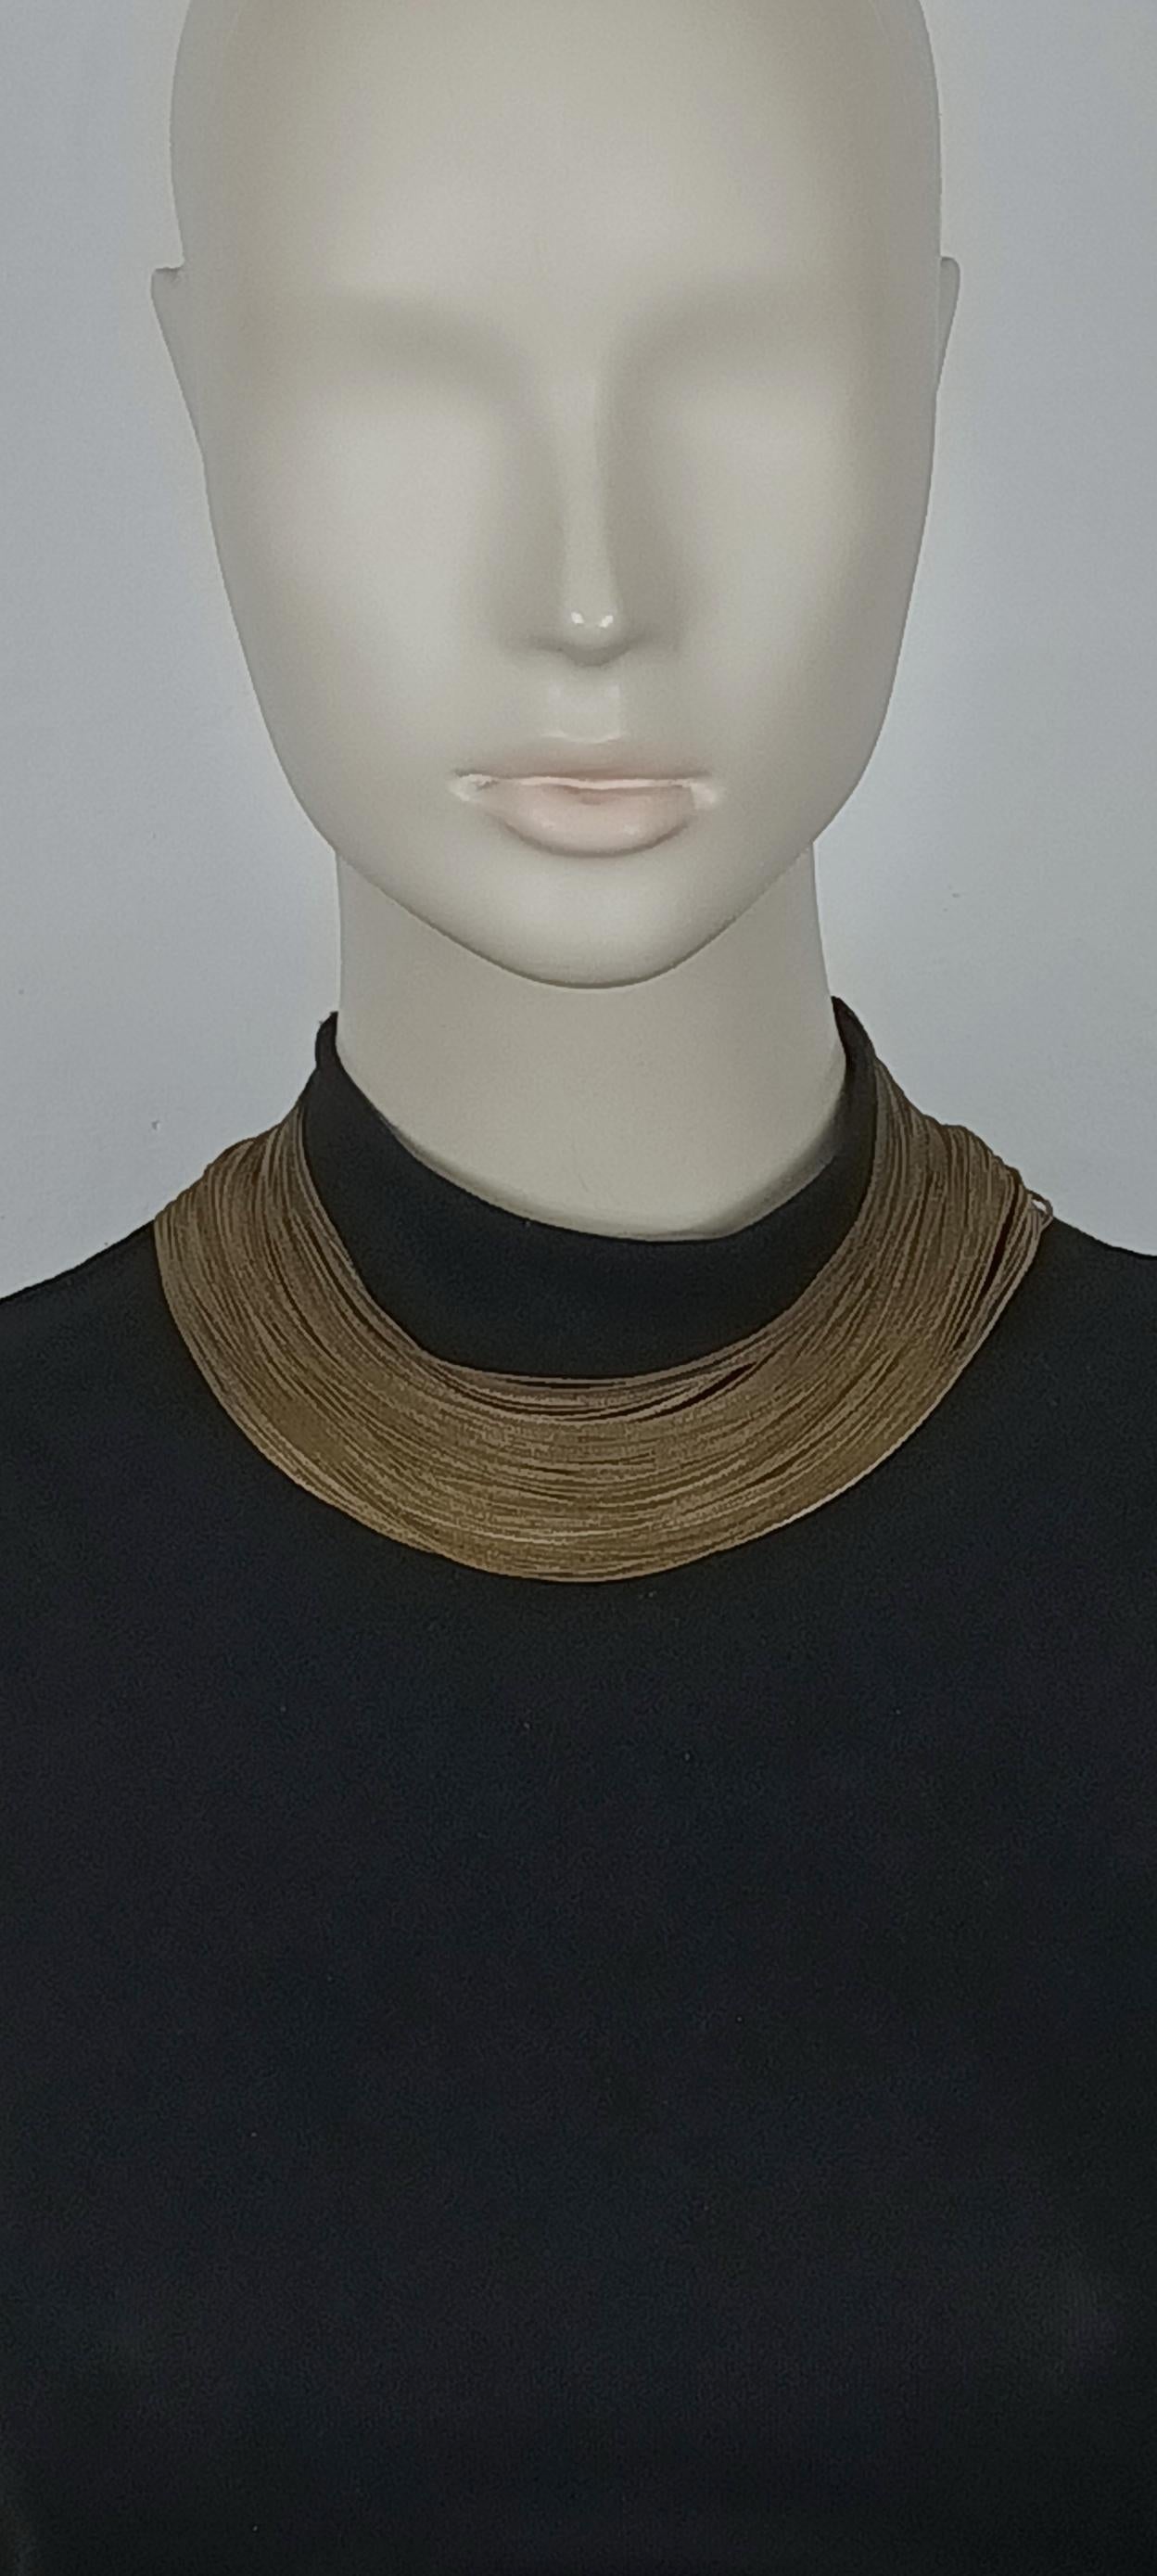 JEAN PAUL GAULTIER vintage antiqued bronze tone multi chain choker necklace.

Adjustable hook clasp closure.

Marked GAULTIER.

Indicative measurements : adjustable length form approx. 35 cm (13.78 inches) to approx. 39.5 cm (15.55